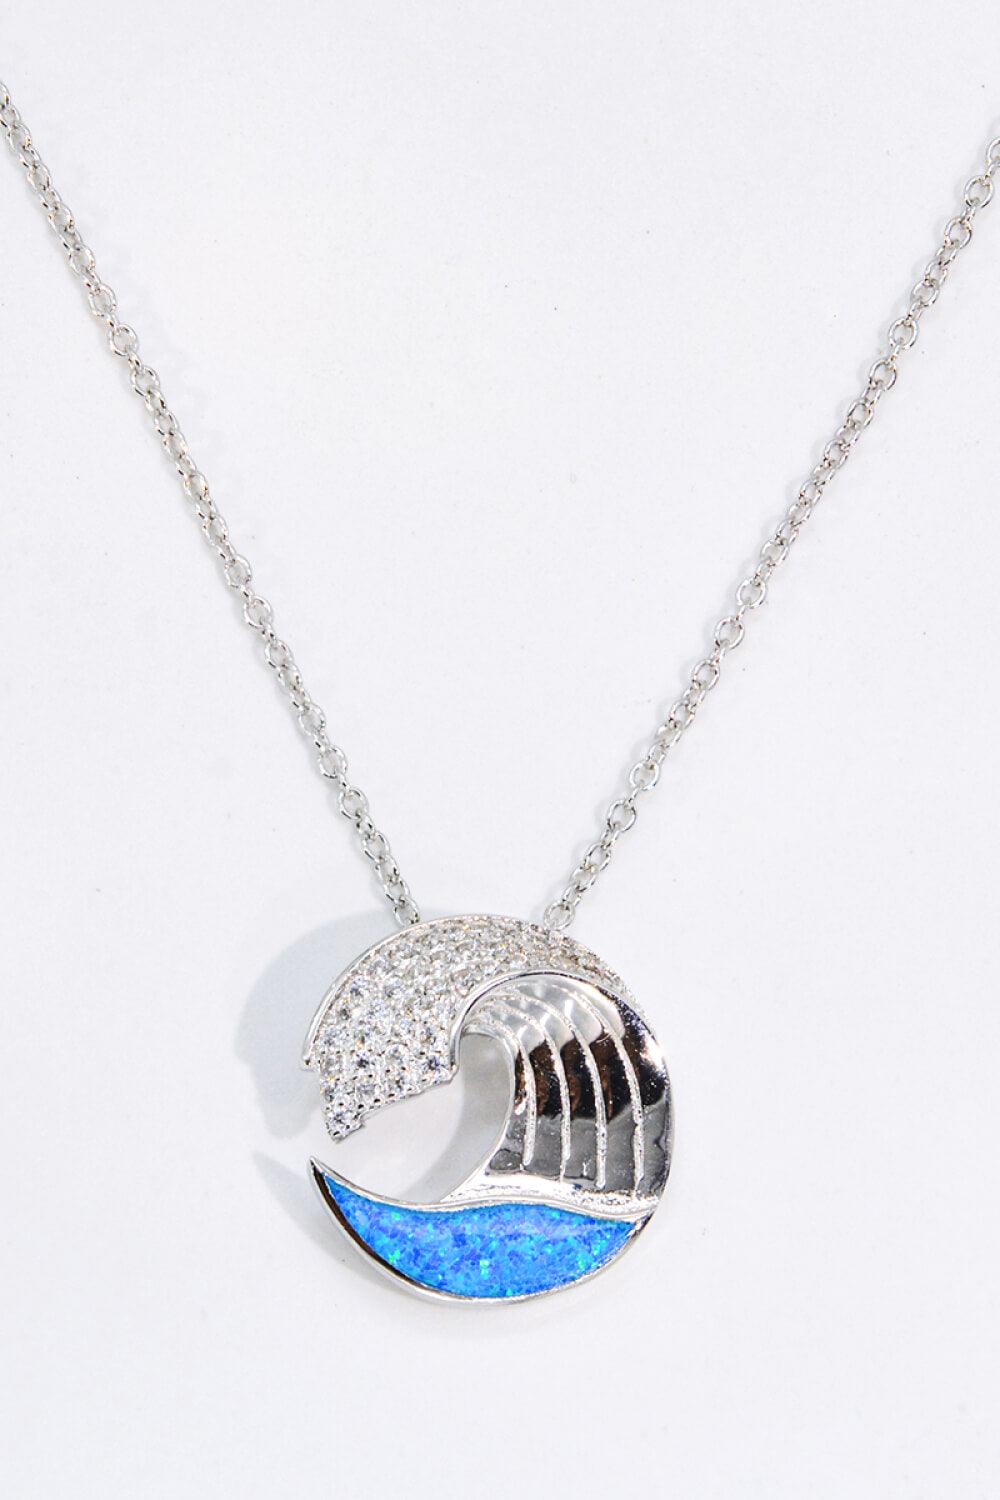 Opal and Zircon Wave Pendant Necklace - Flyclothing LLC